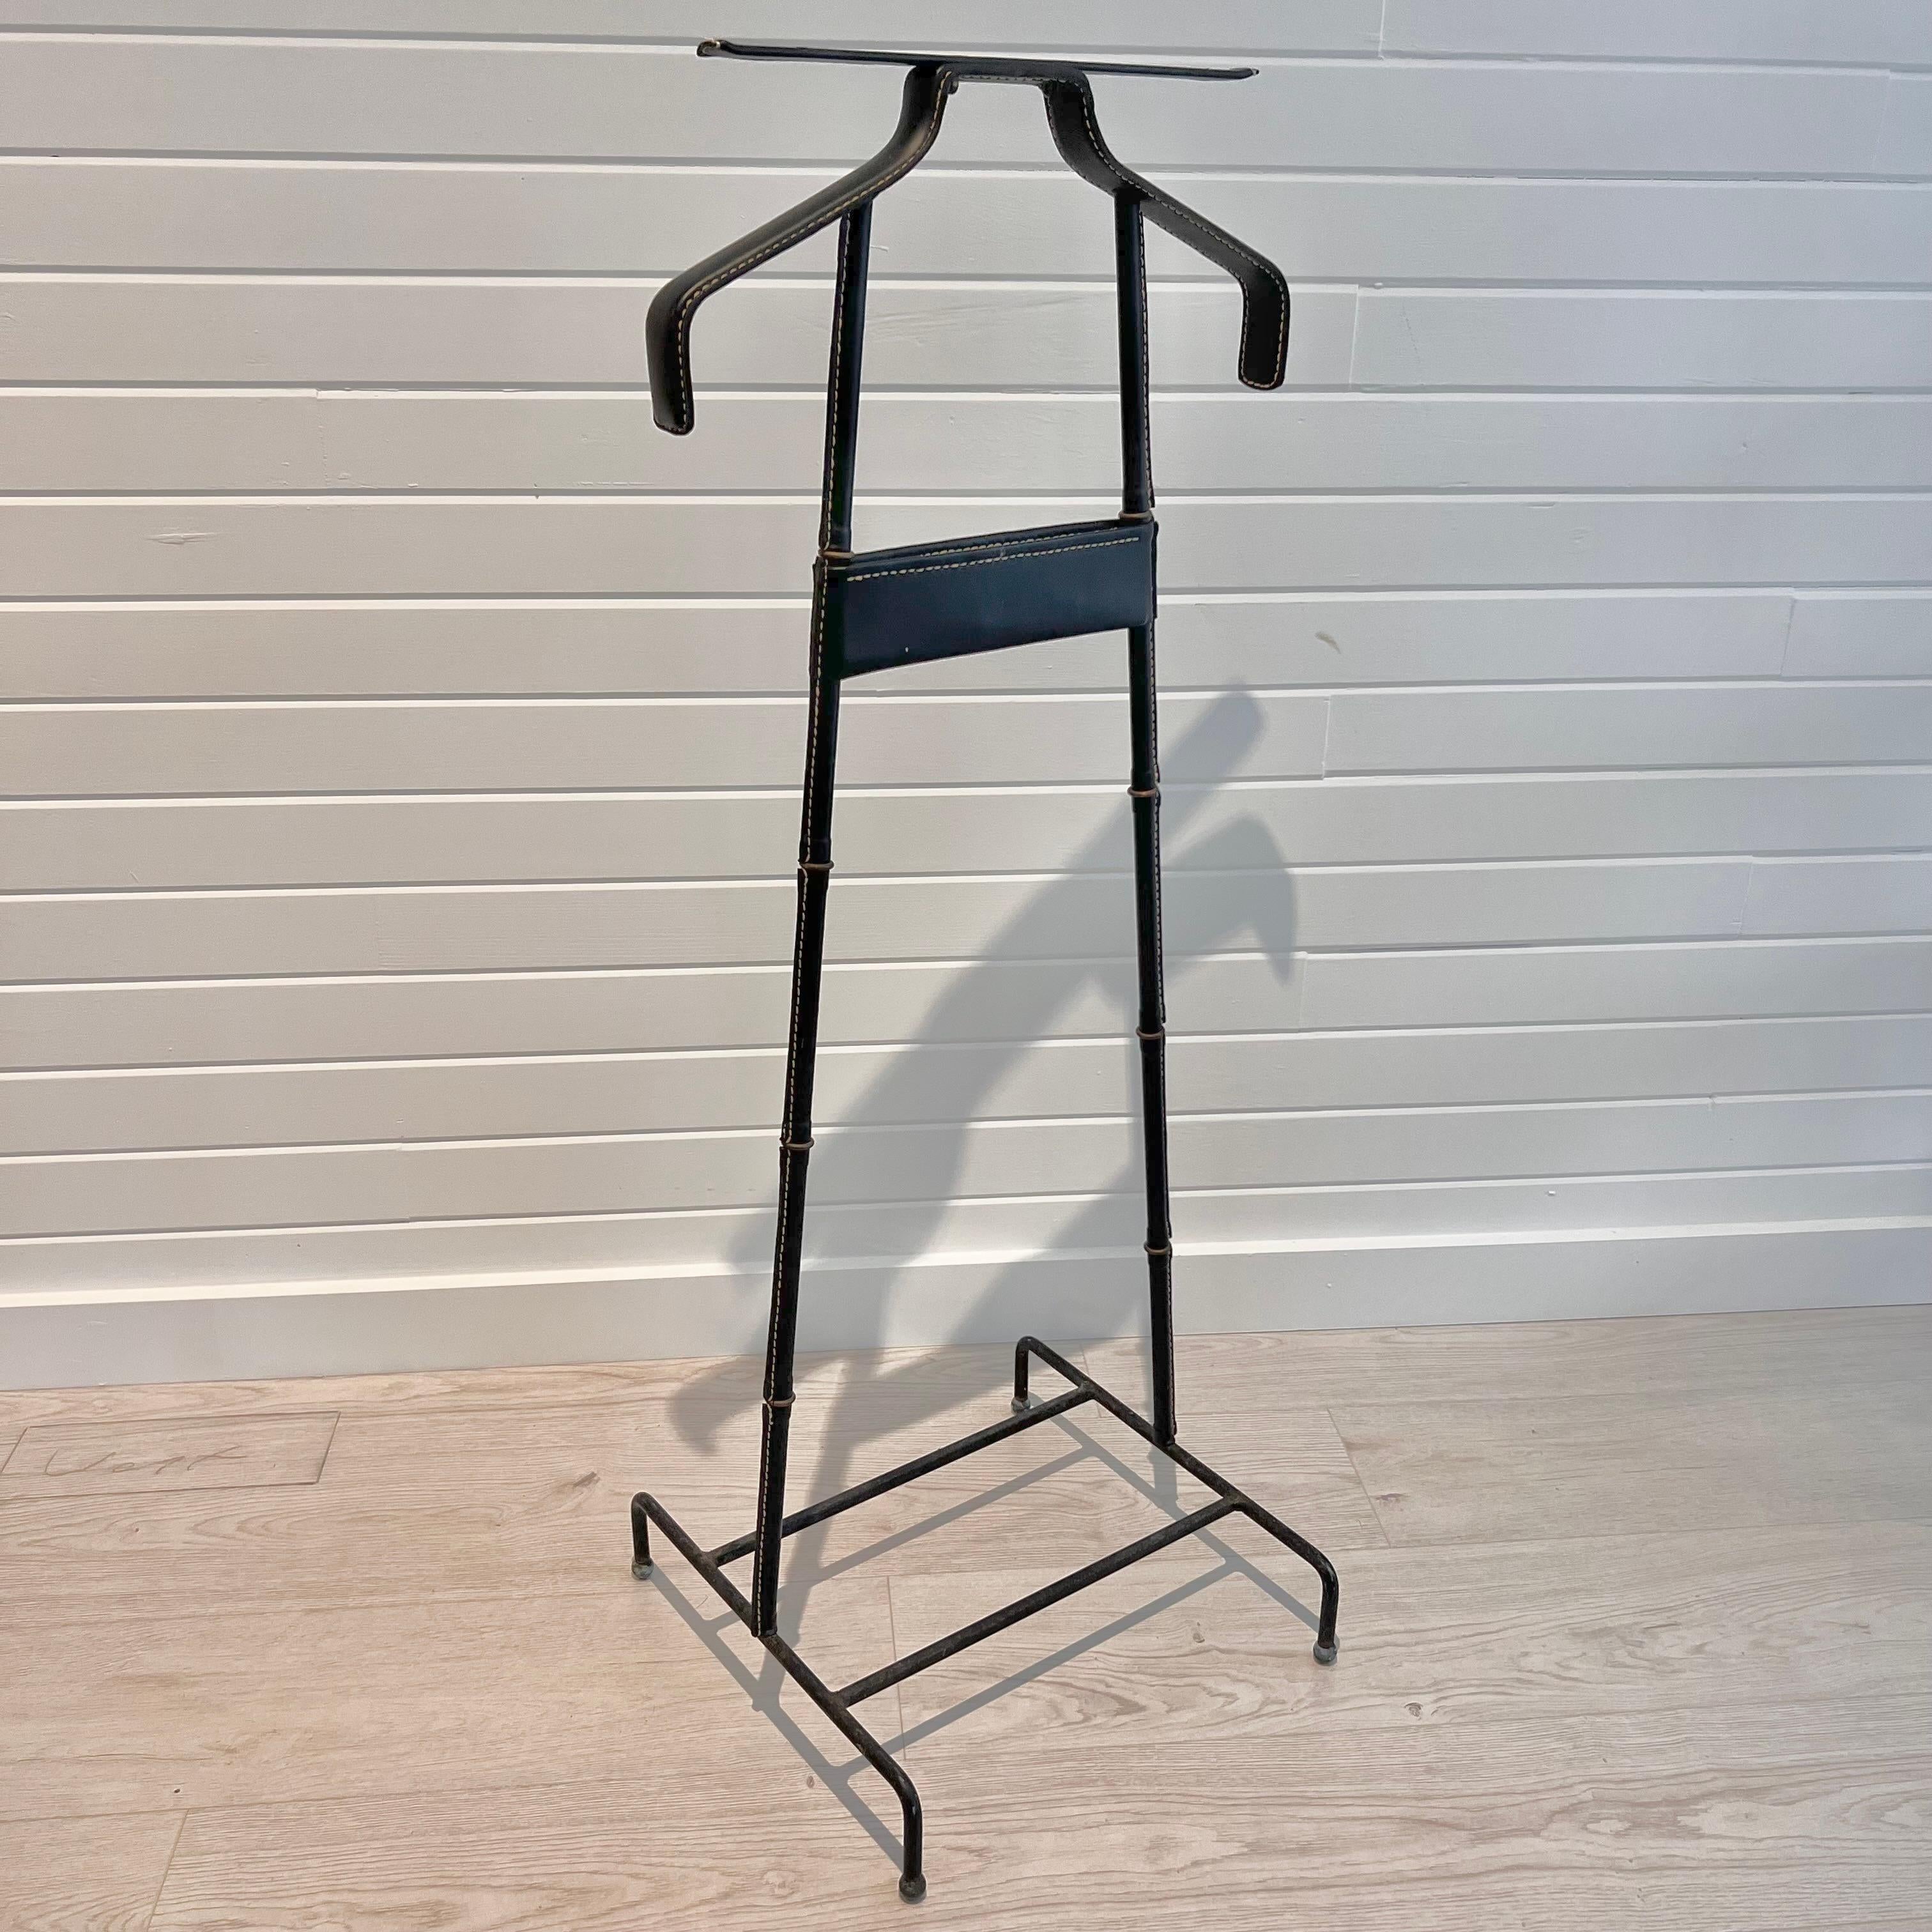 Handsome black coat stand / valet by Jacques Adnet. Valet has a black iron base with brass ball feet giving it an elegant and contrasted brutalist touch. Iron body wrapped in a black leather with brass ring separators giving it the classic Adnet